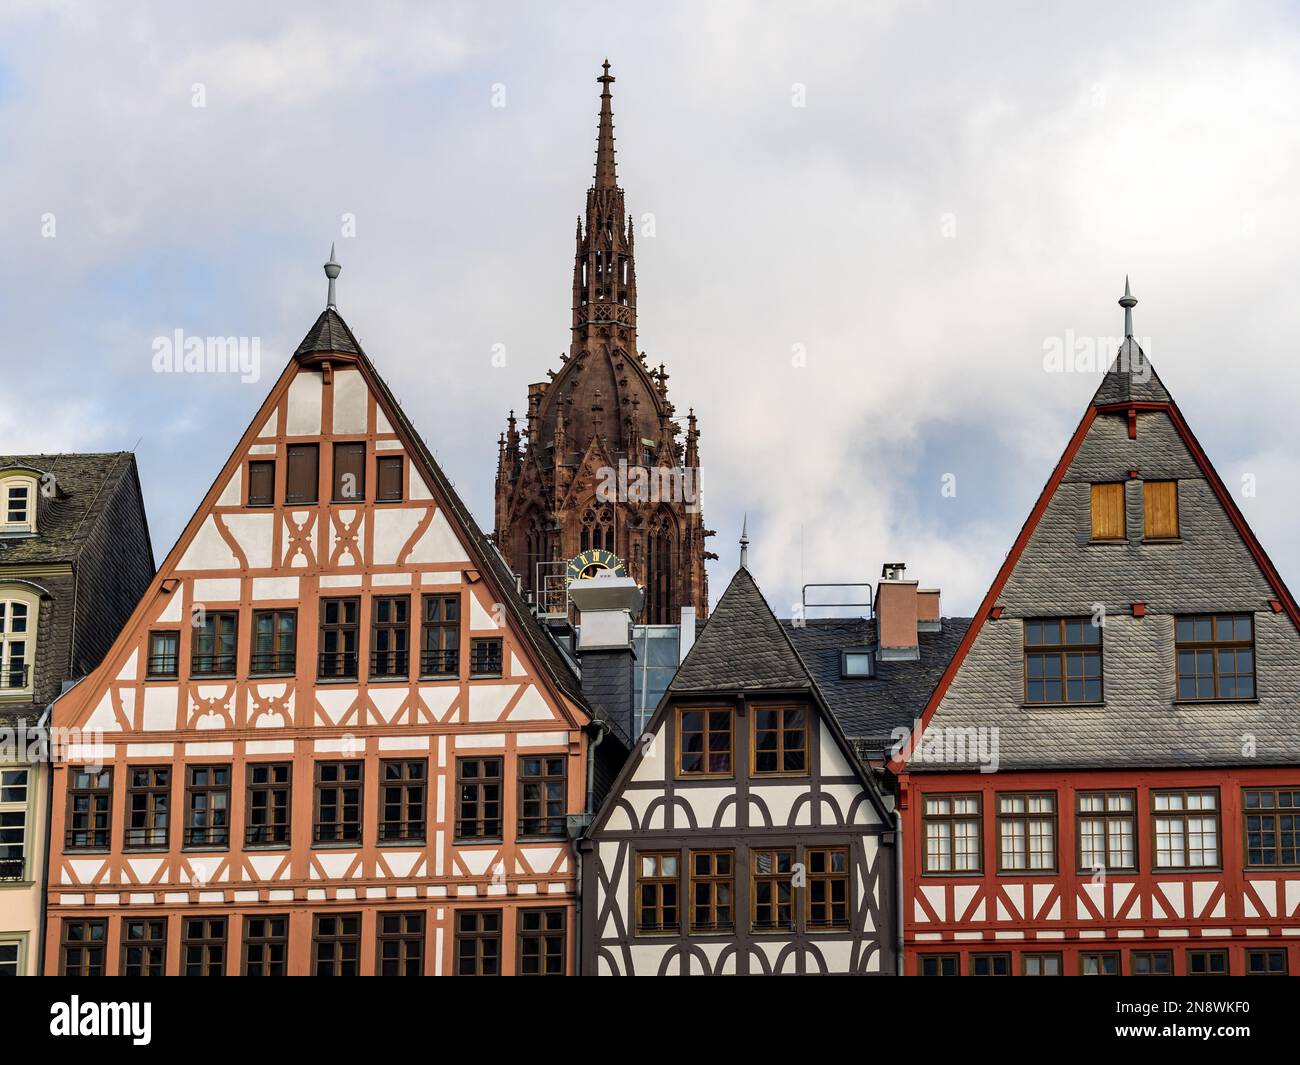 Old town architecture in the city centre. The cathedral Kaiserdom is behind the half-timbered buildings. Traditional facades are part of the exterior. Stock Photo